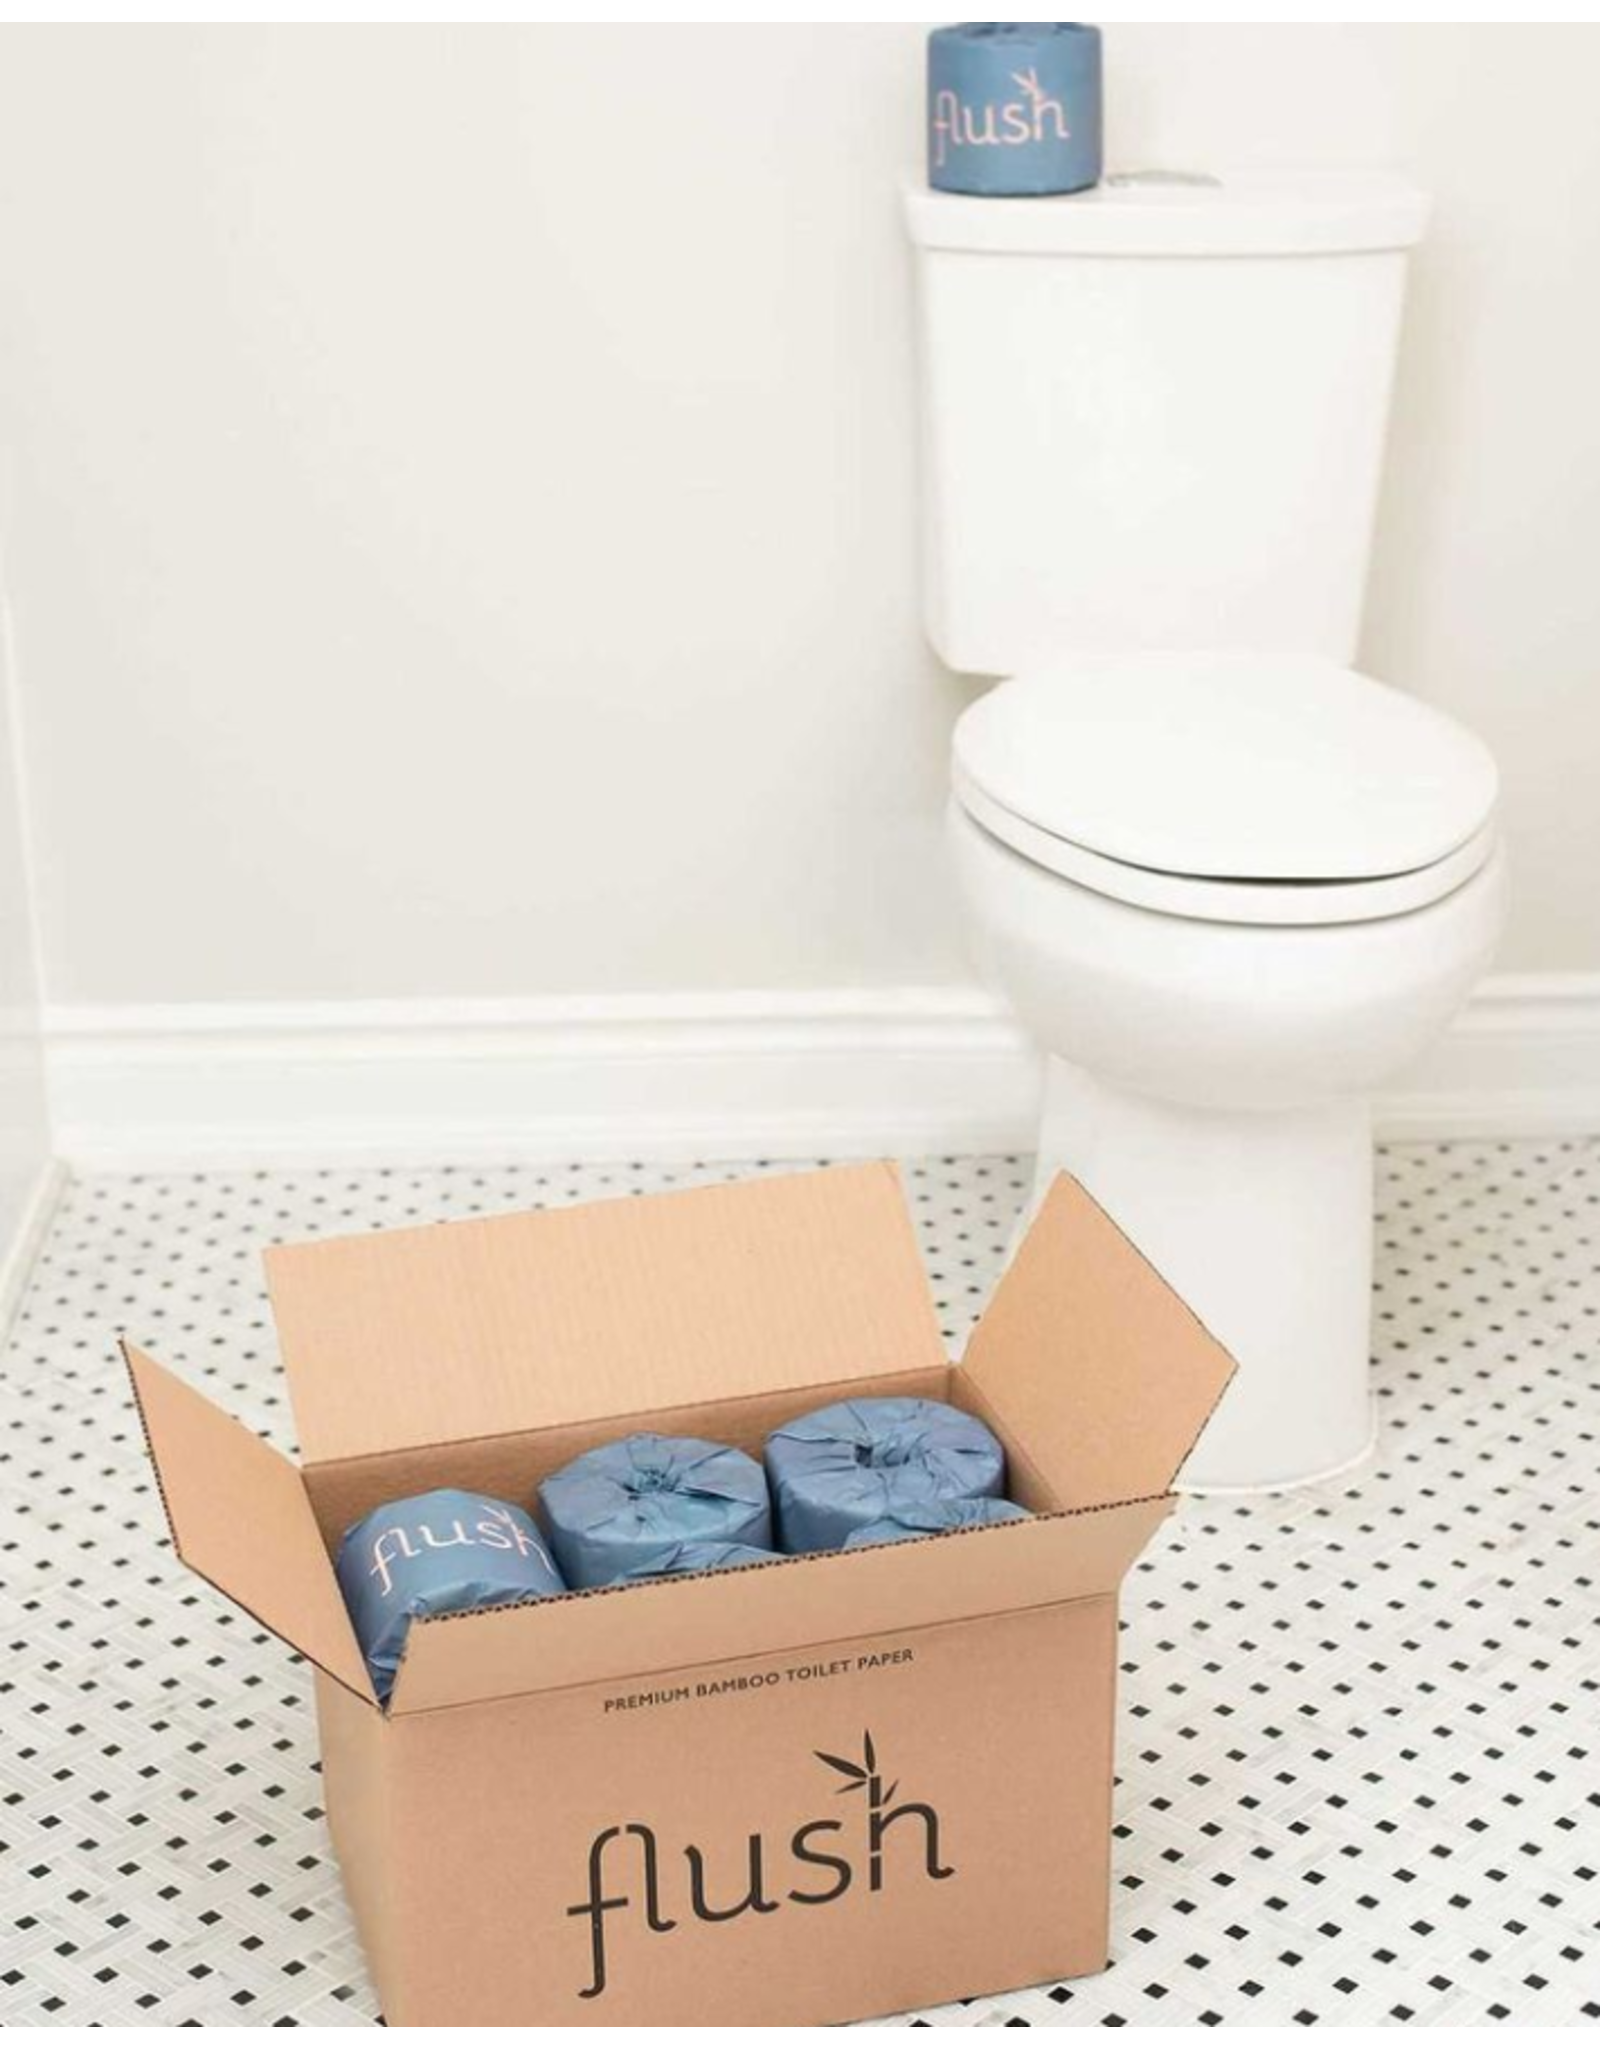 Flush Bamboo Tree-free 100% Bamboo Toilet Paper by FLUSH Bamboo